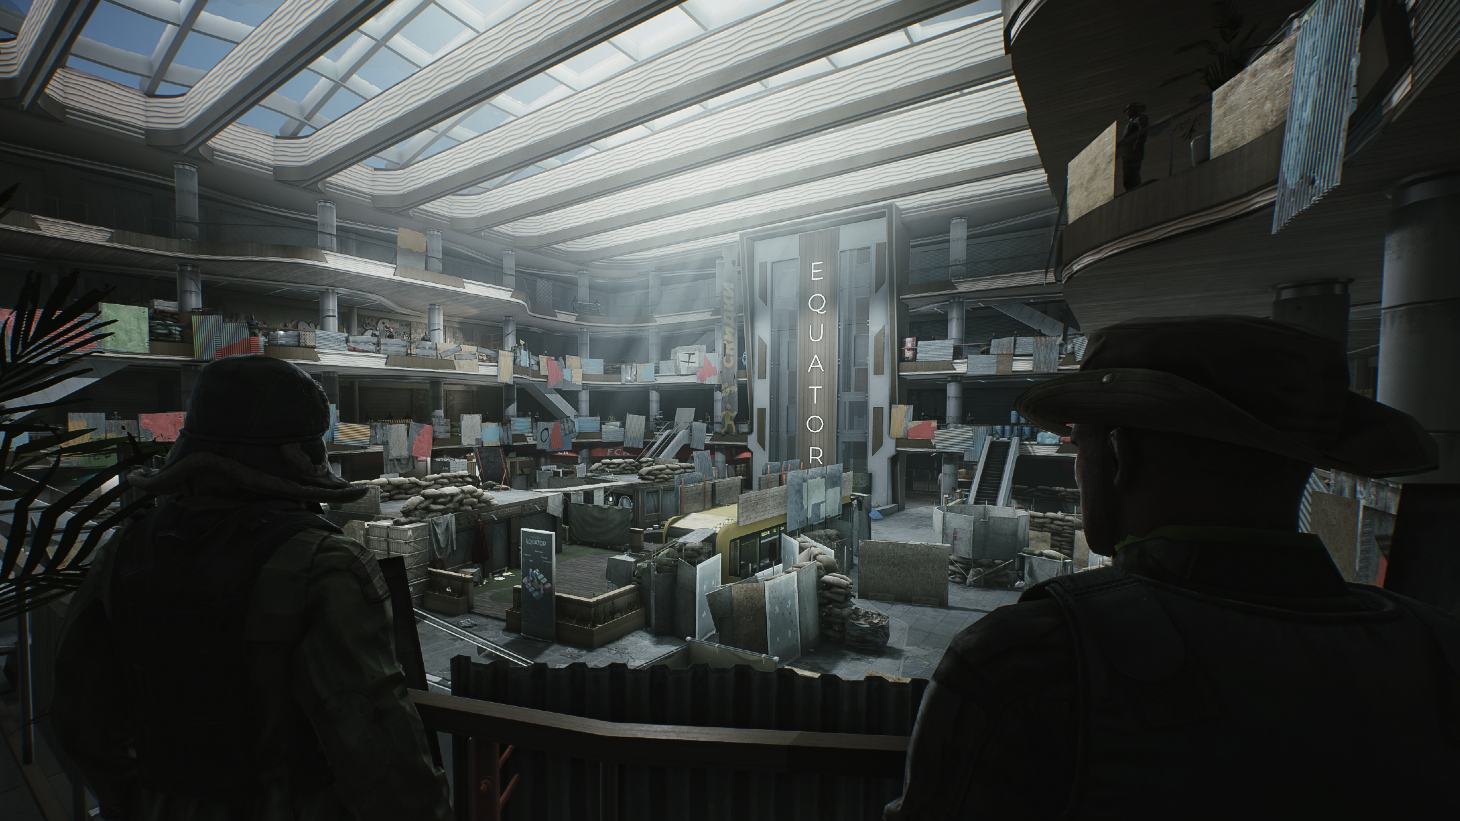 Escape From Tarkov Arena set to have first esports event